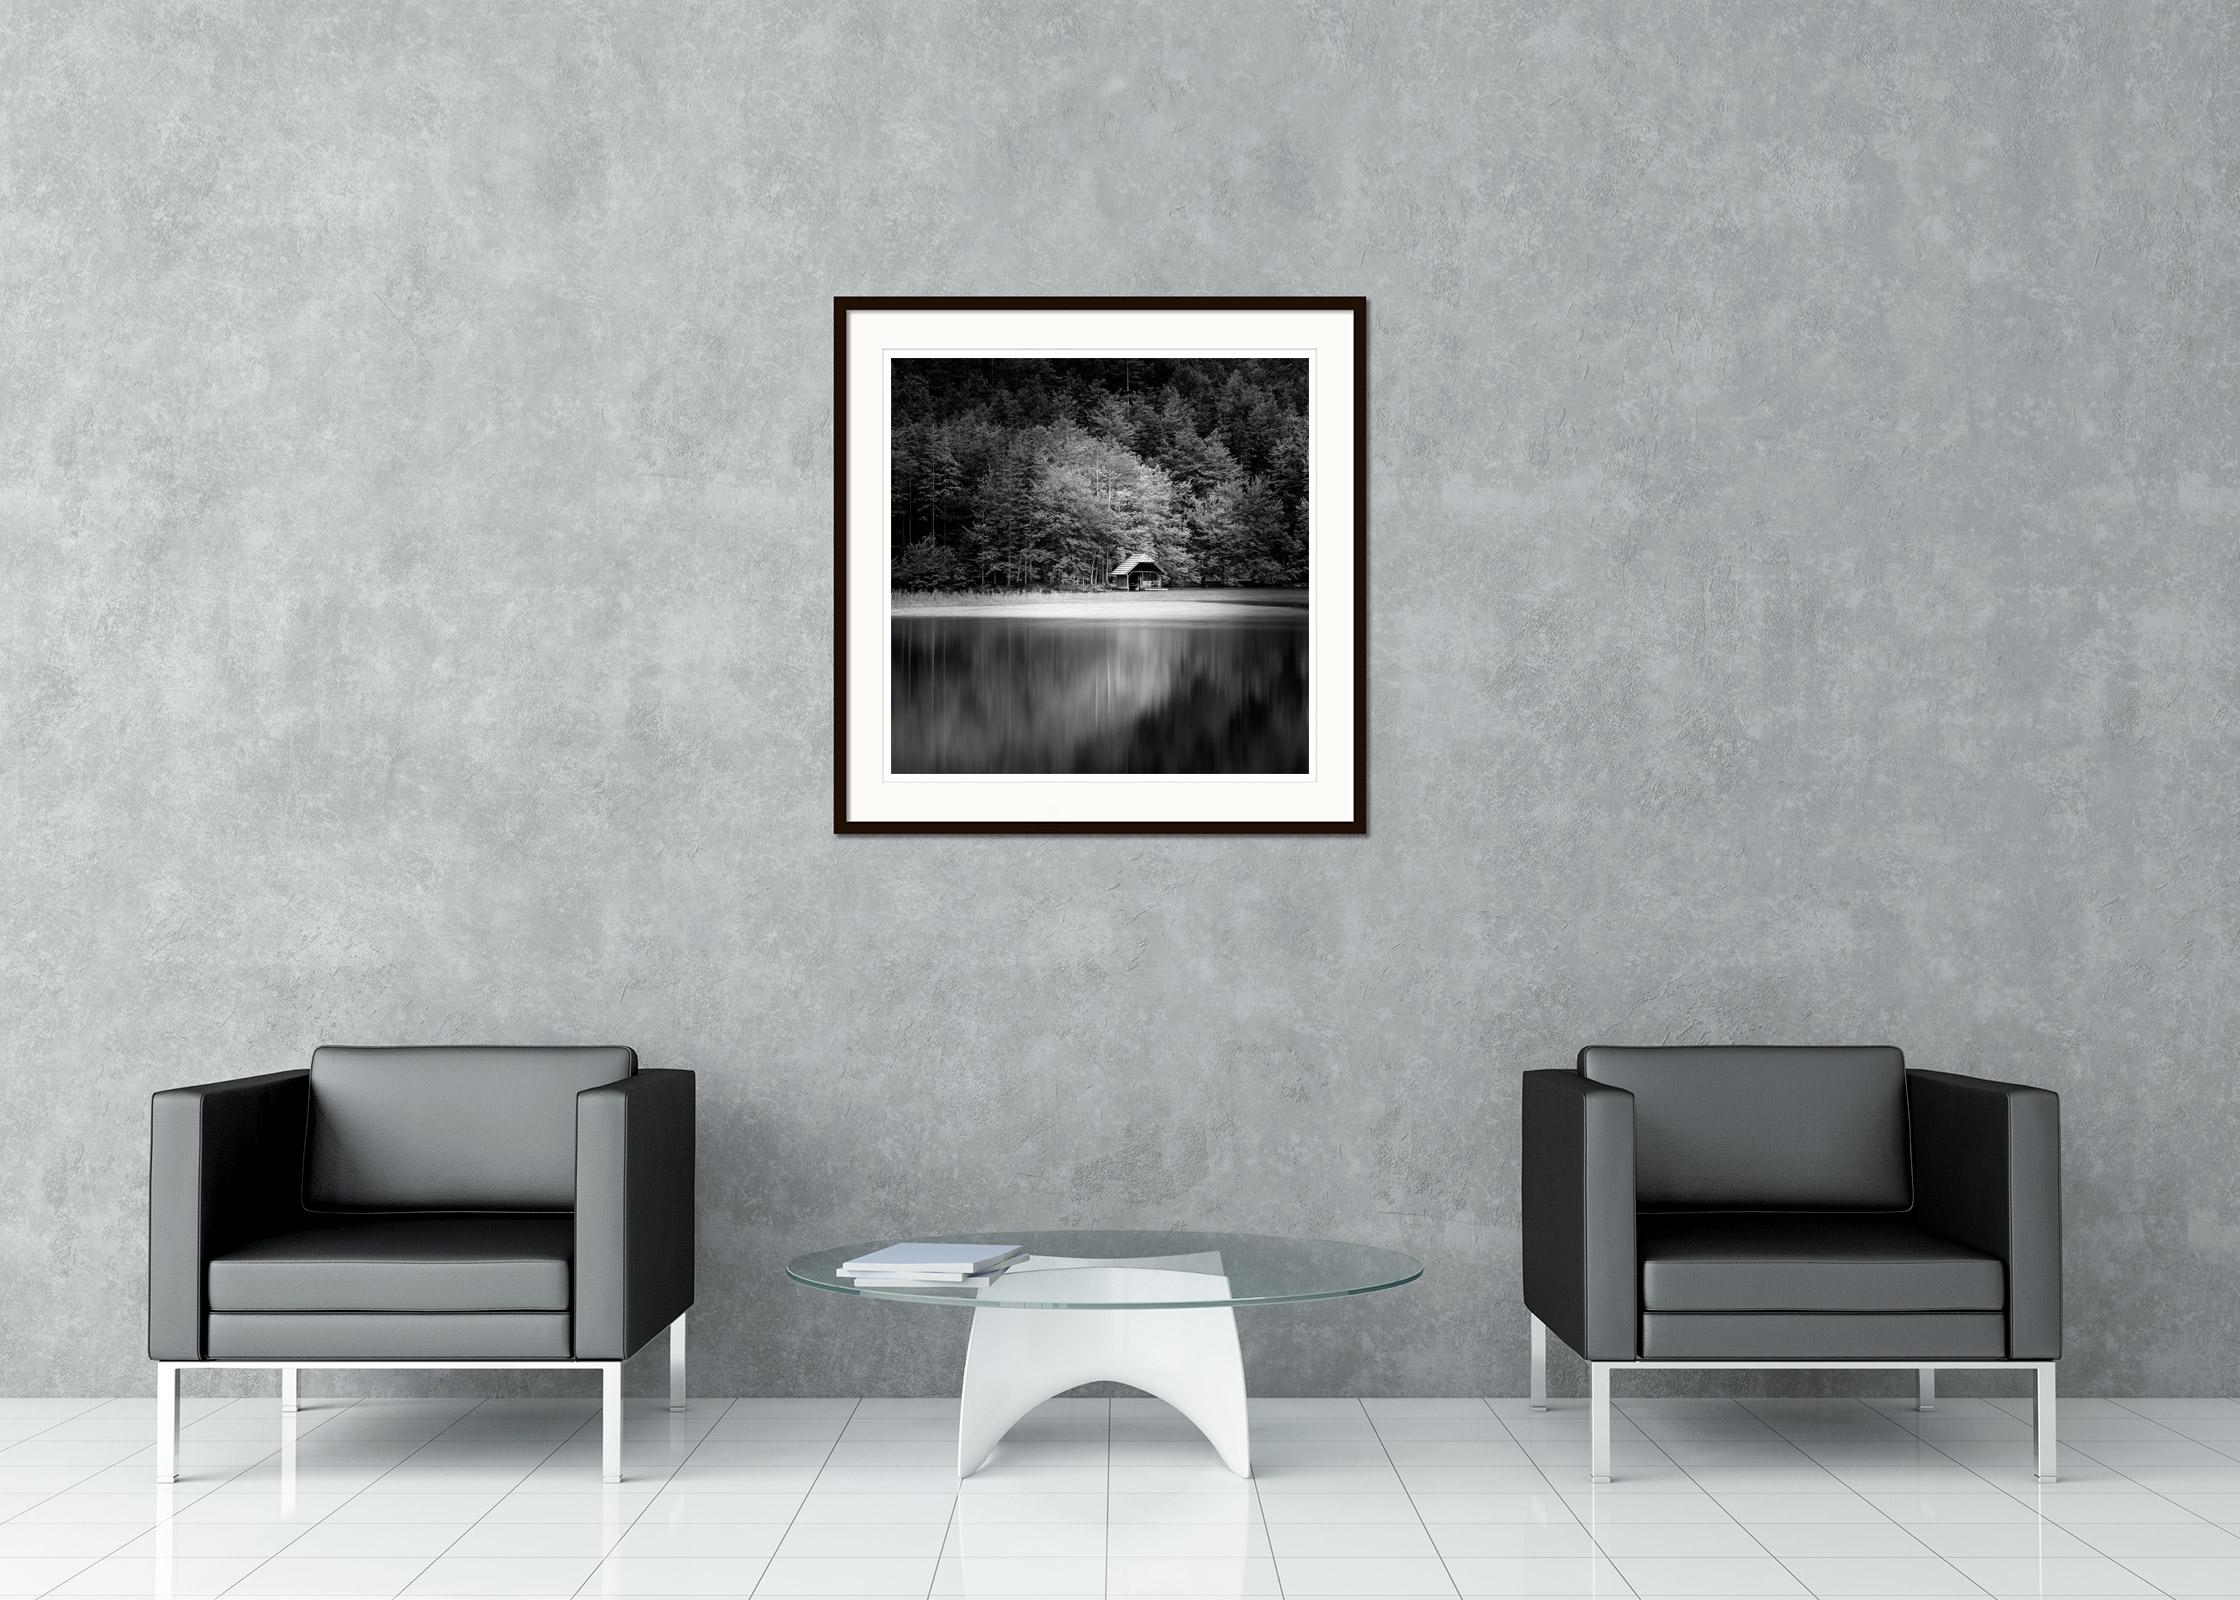 Black and white fine art long exposure waterscape - landscape photography. Wooden boat house, the mountains, the lake and the forest, Austria. Archival pigment ink print as part of a limited edition of 9. All Gerald Berghammer prints are made to